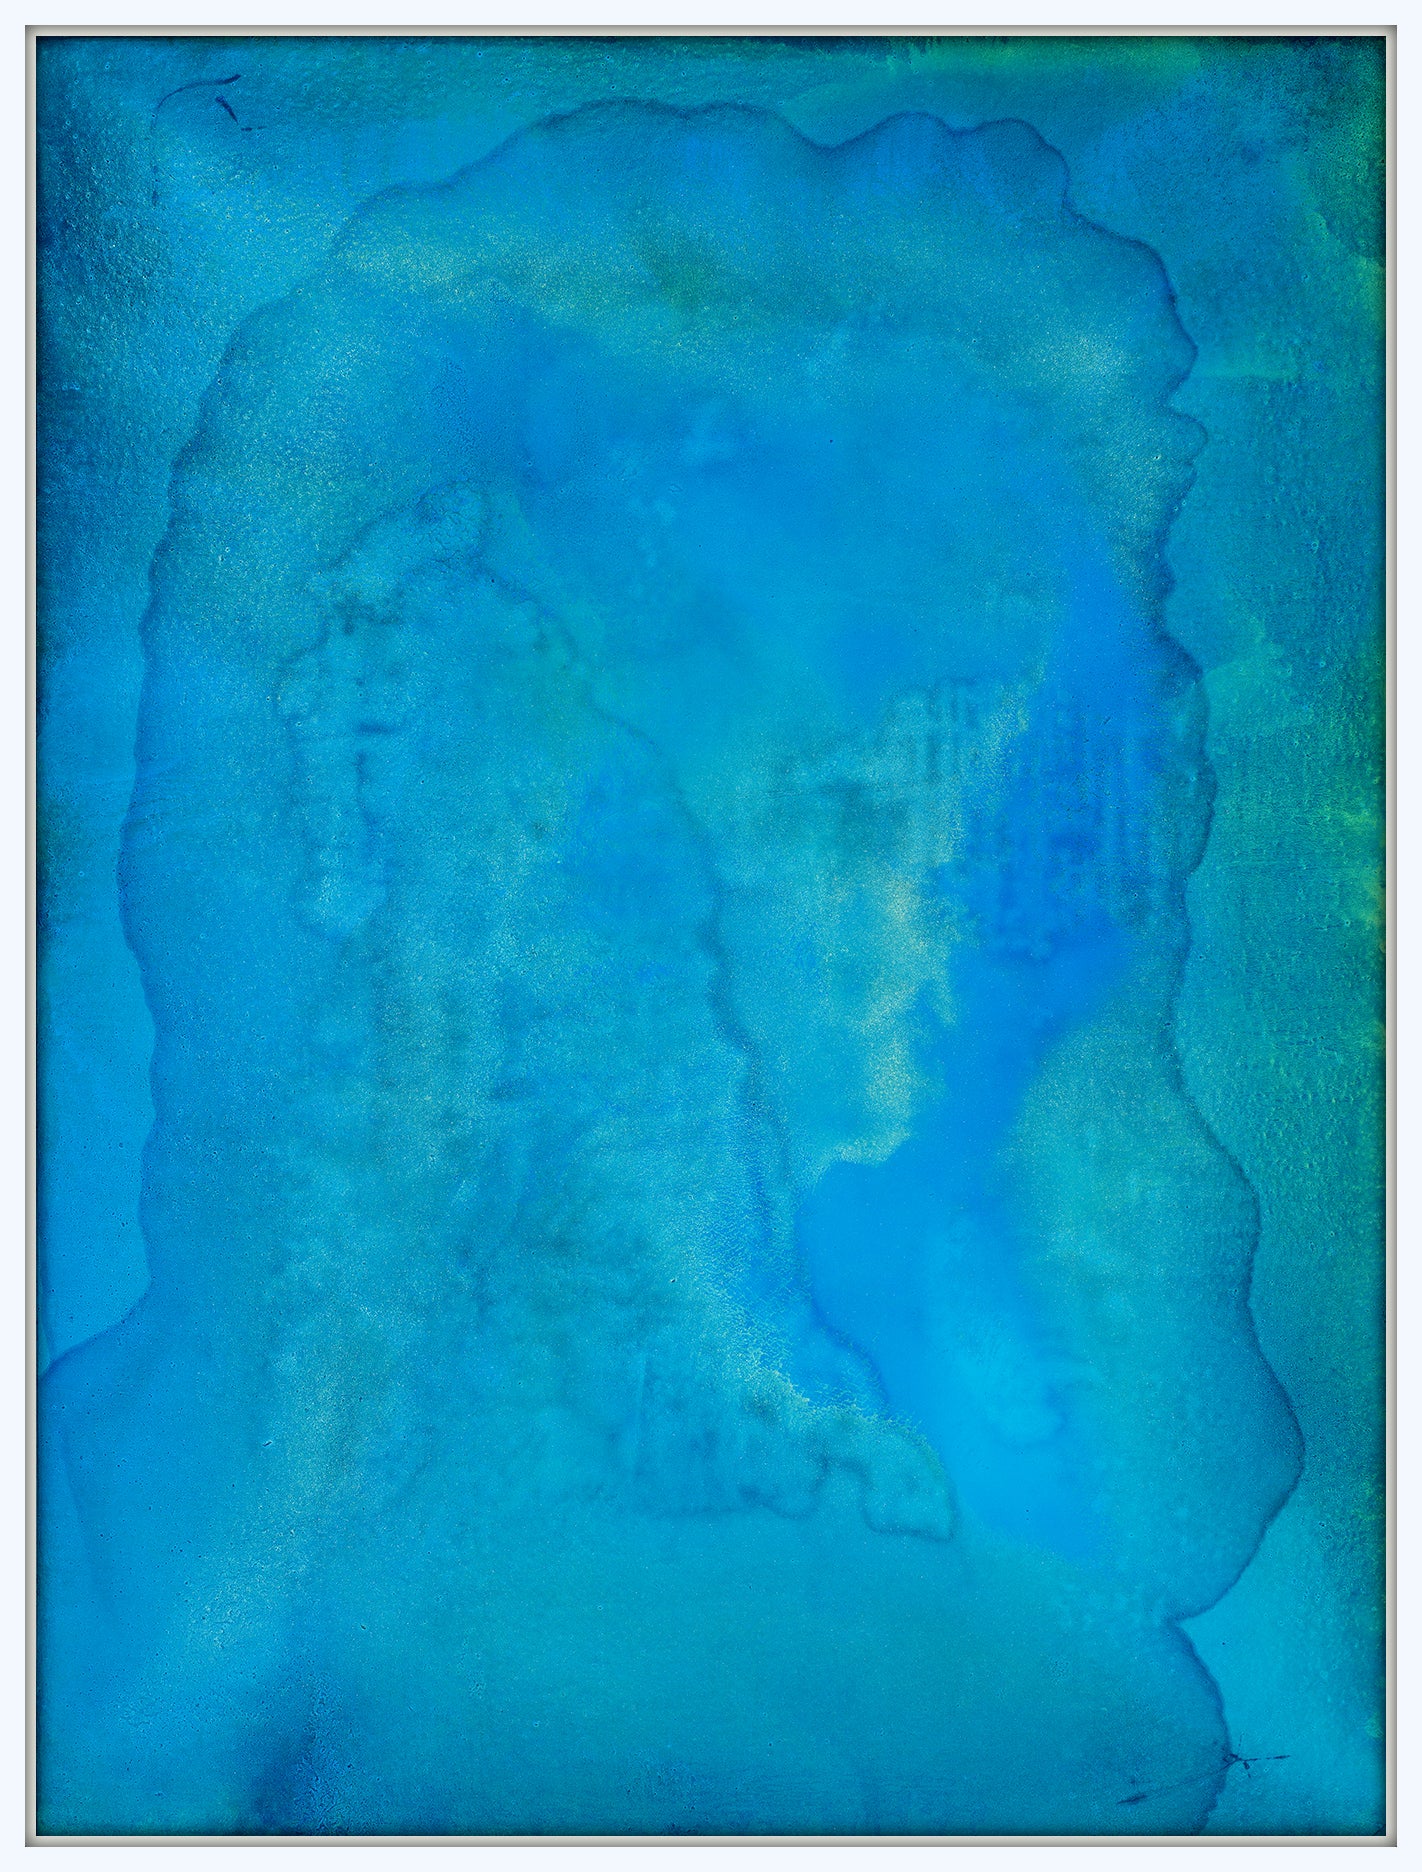 Cerulean Dream | Giclee Print on Gallery-Wrapped Stretched Canvas